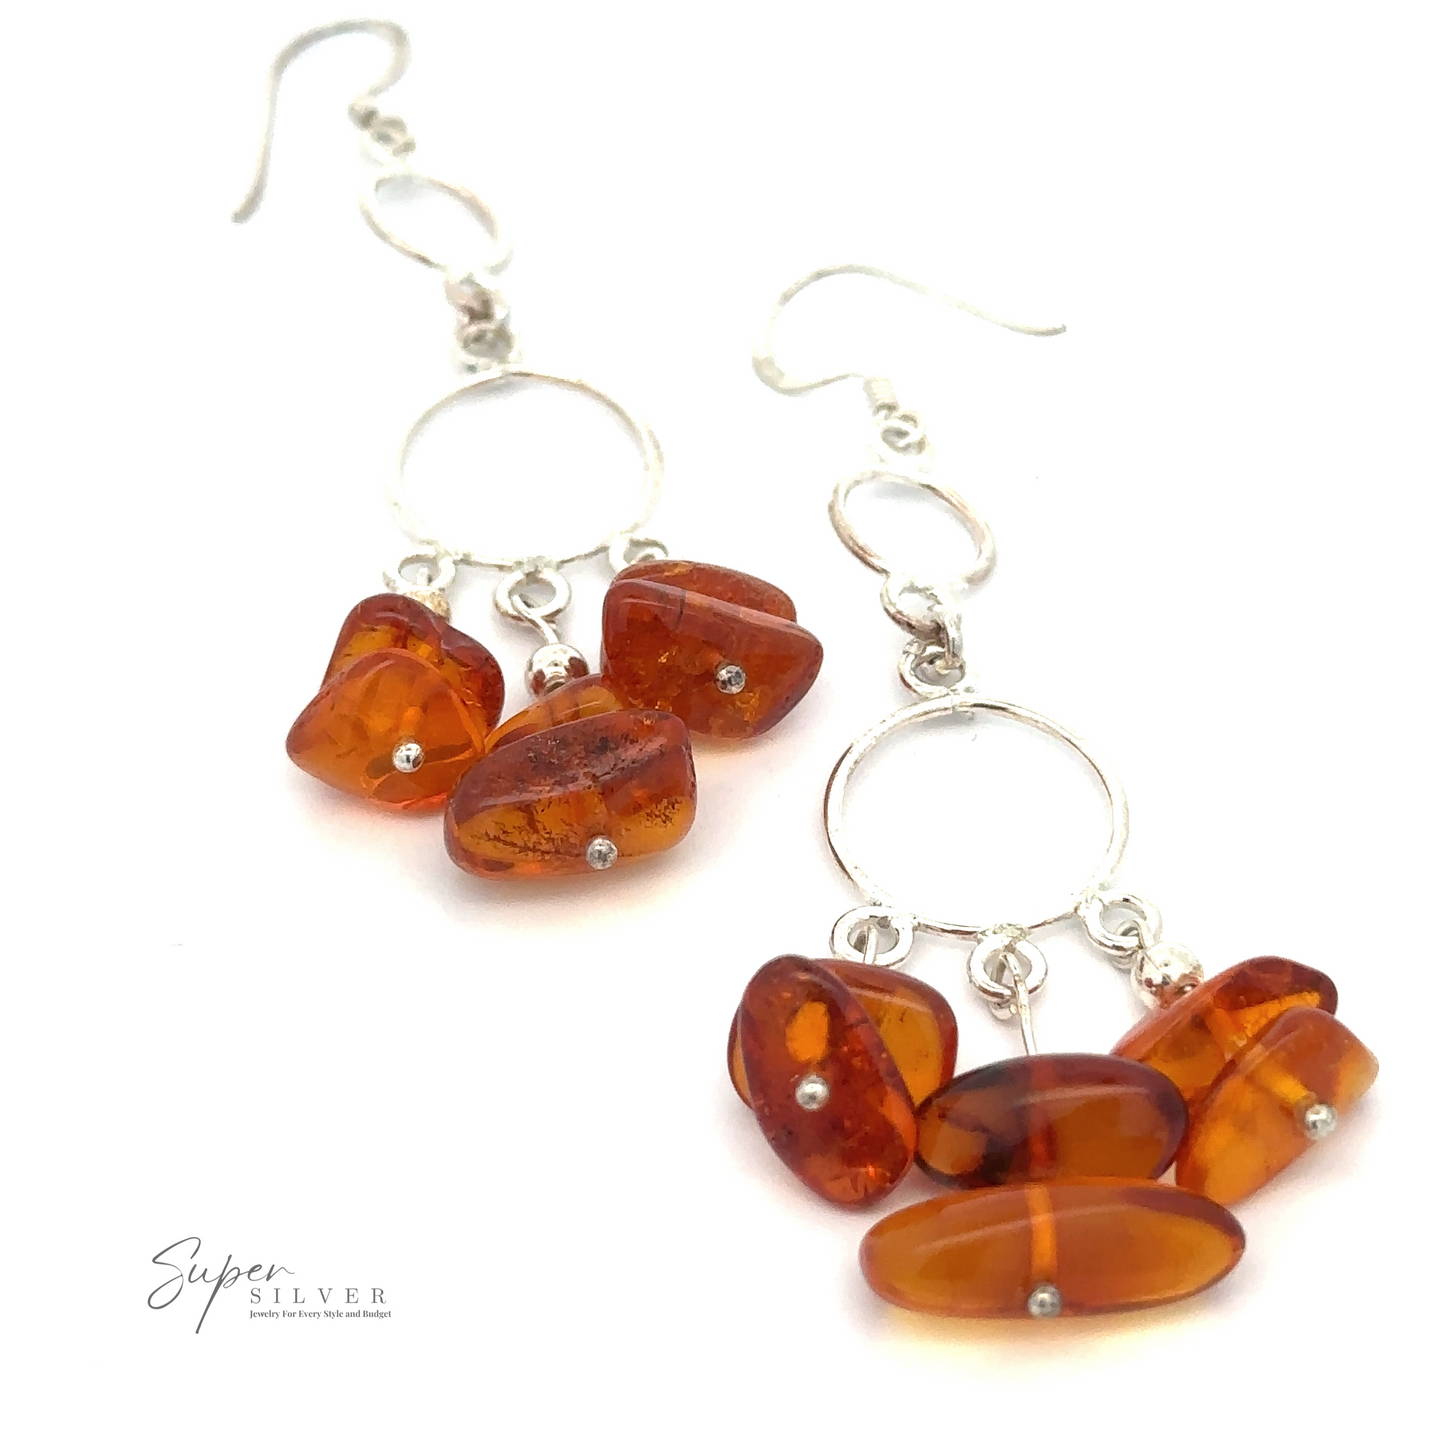 
                  
                    A pair of Hoop Dangle Earrings with Amber featuring multiple Baltic Amber stones attached to sterling silver rings. The logo "Super Silver" is visible in the bottom left corner.
                  
                